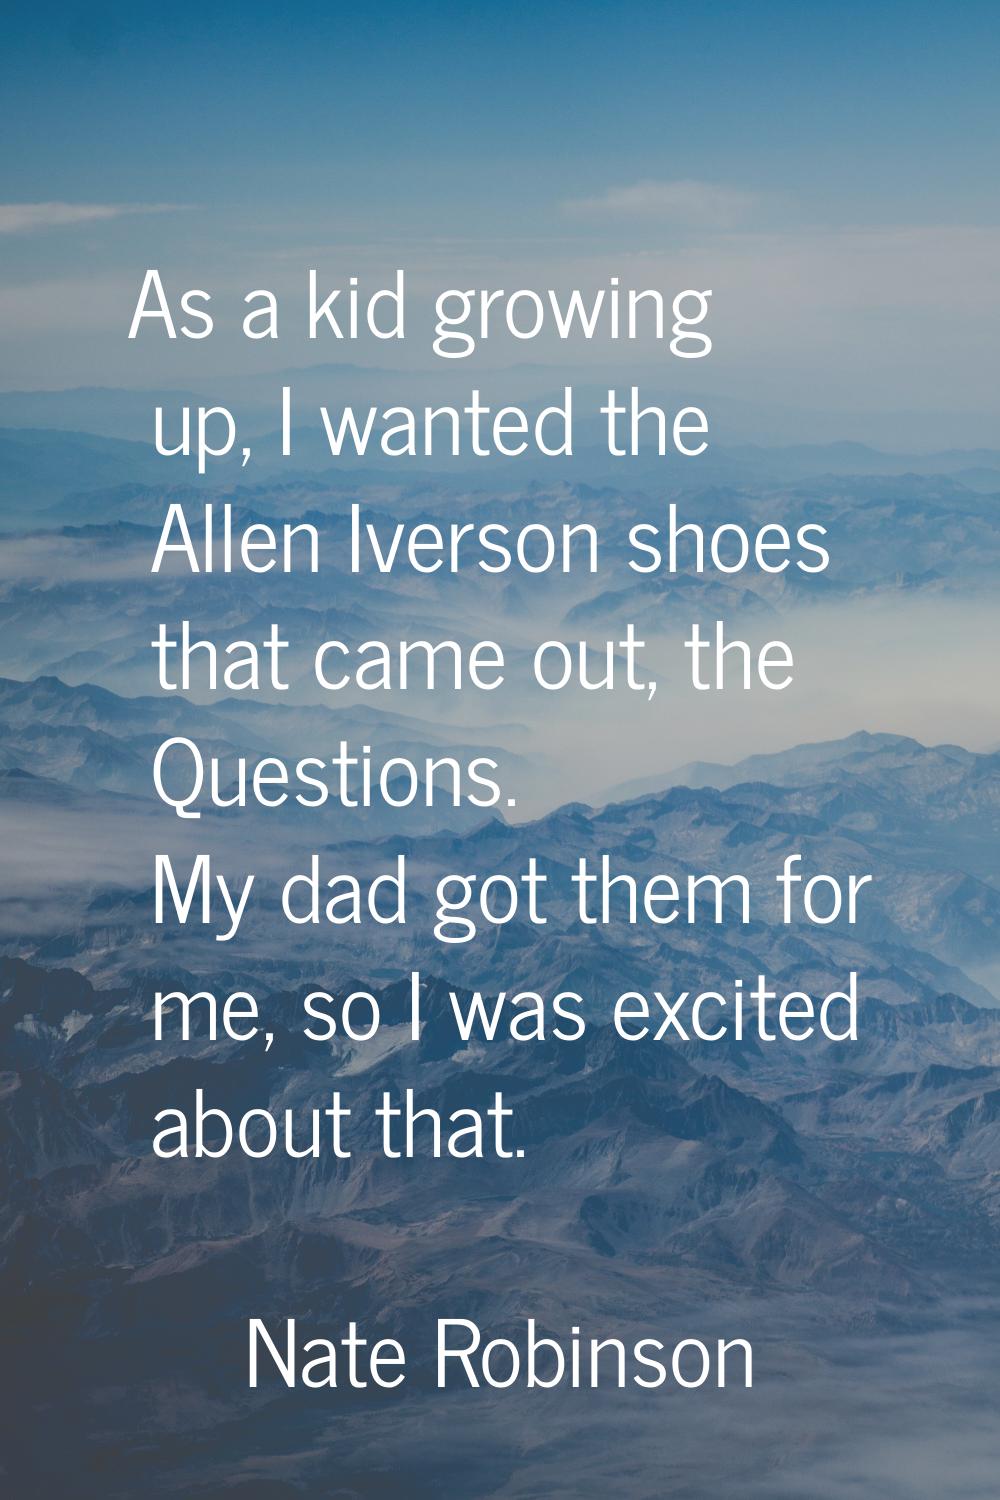 As a kid growing up, I wanted the Allen Iverson shoes that came out, the Questions. My dad got them